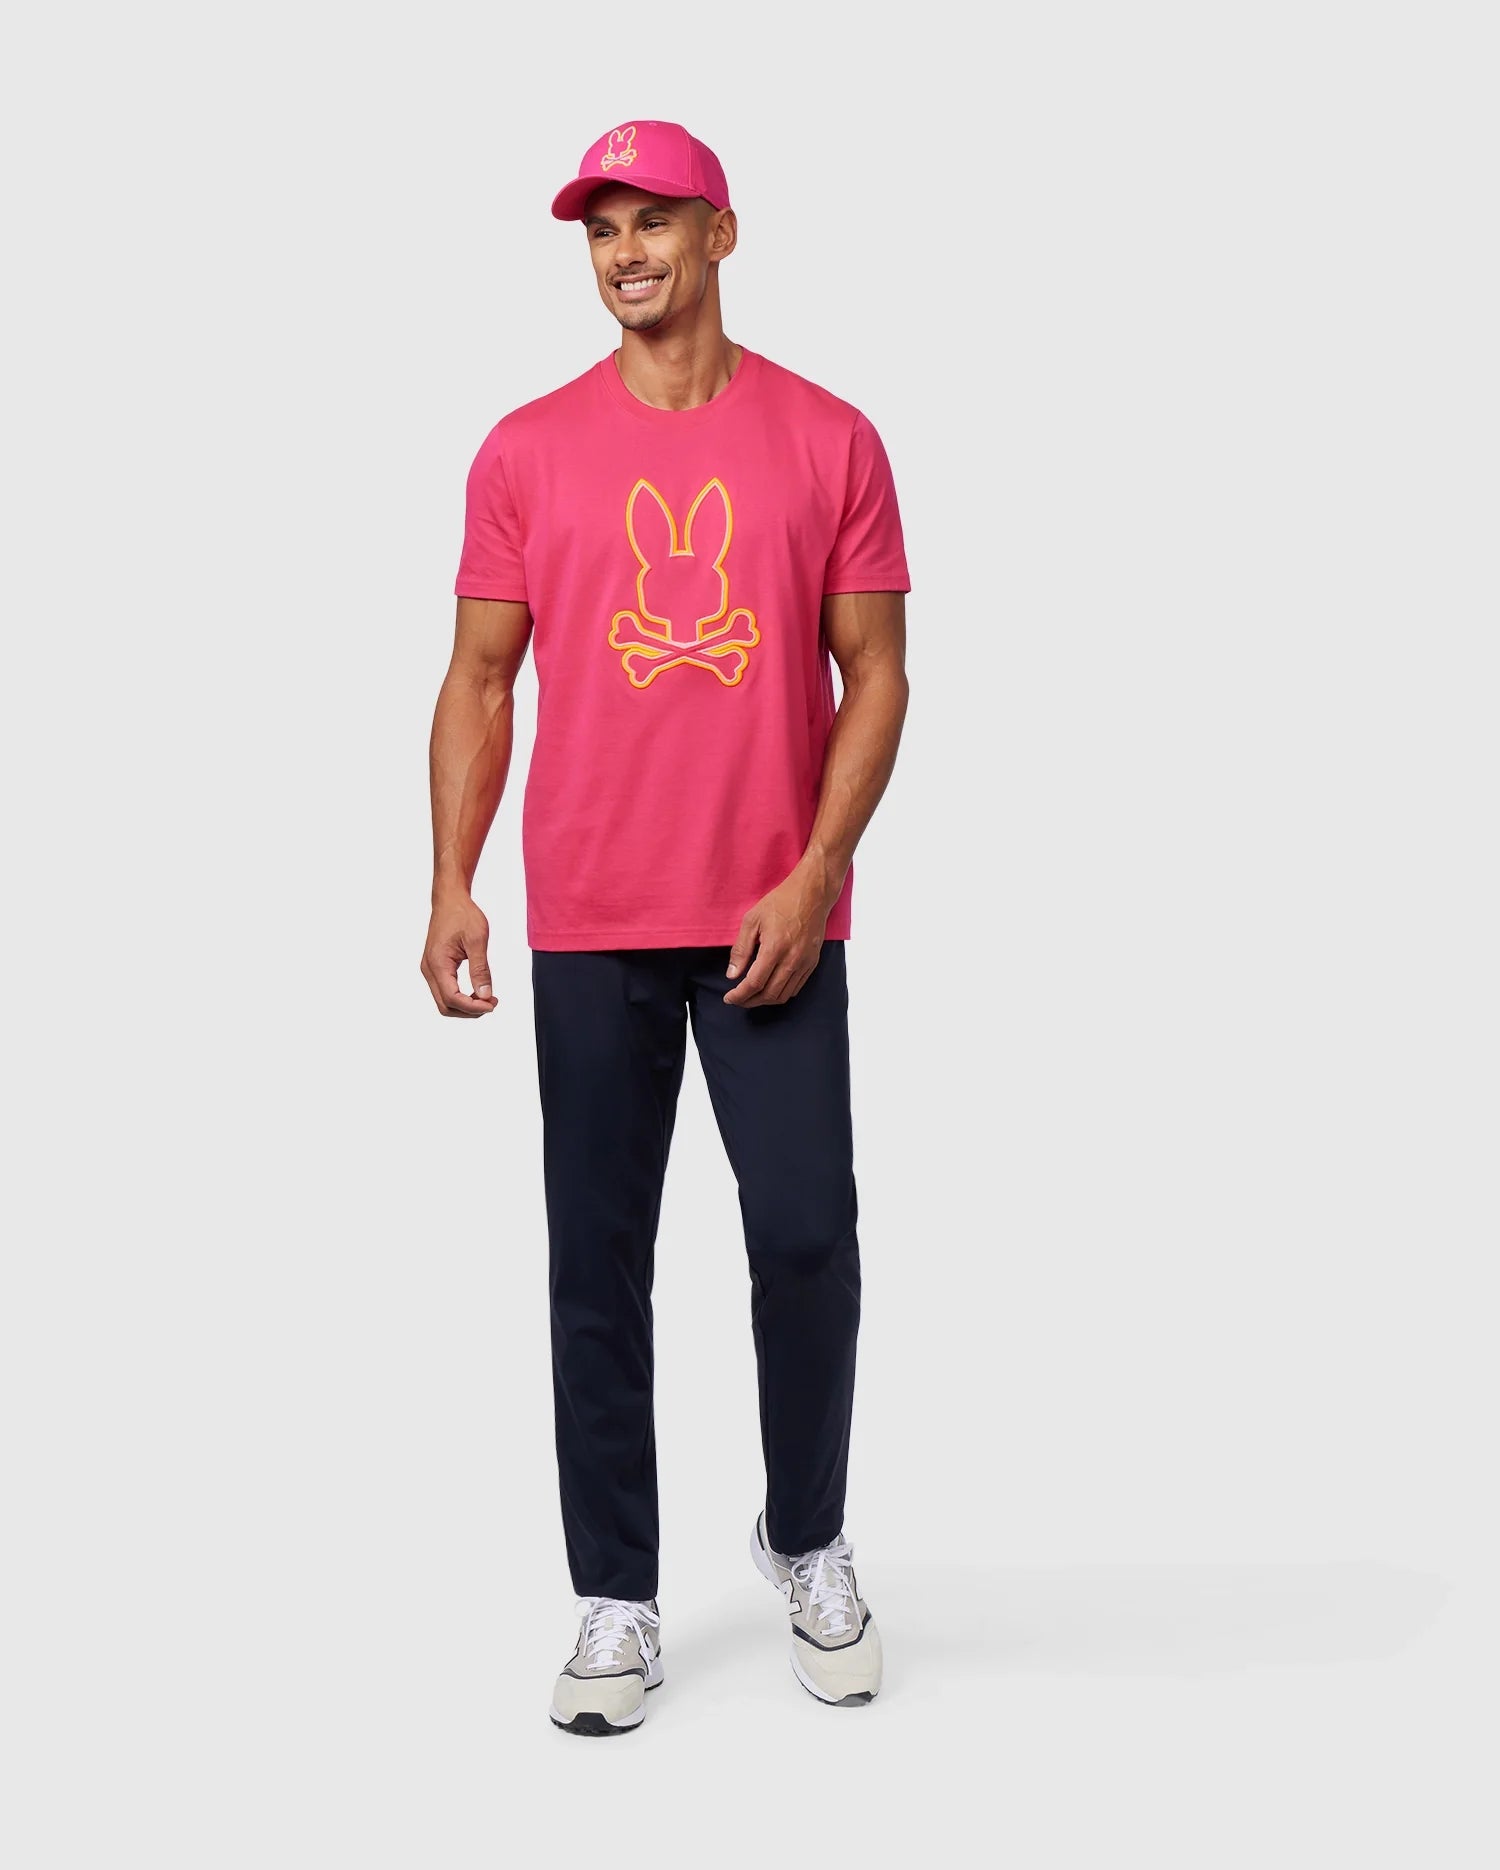 Sale  Clothing & Apparels for Men & Kids – Psycho Bunny Canada